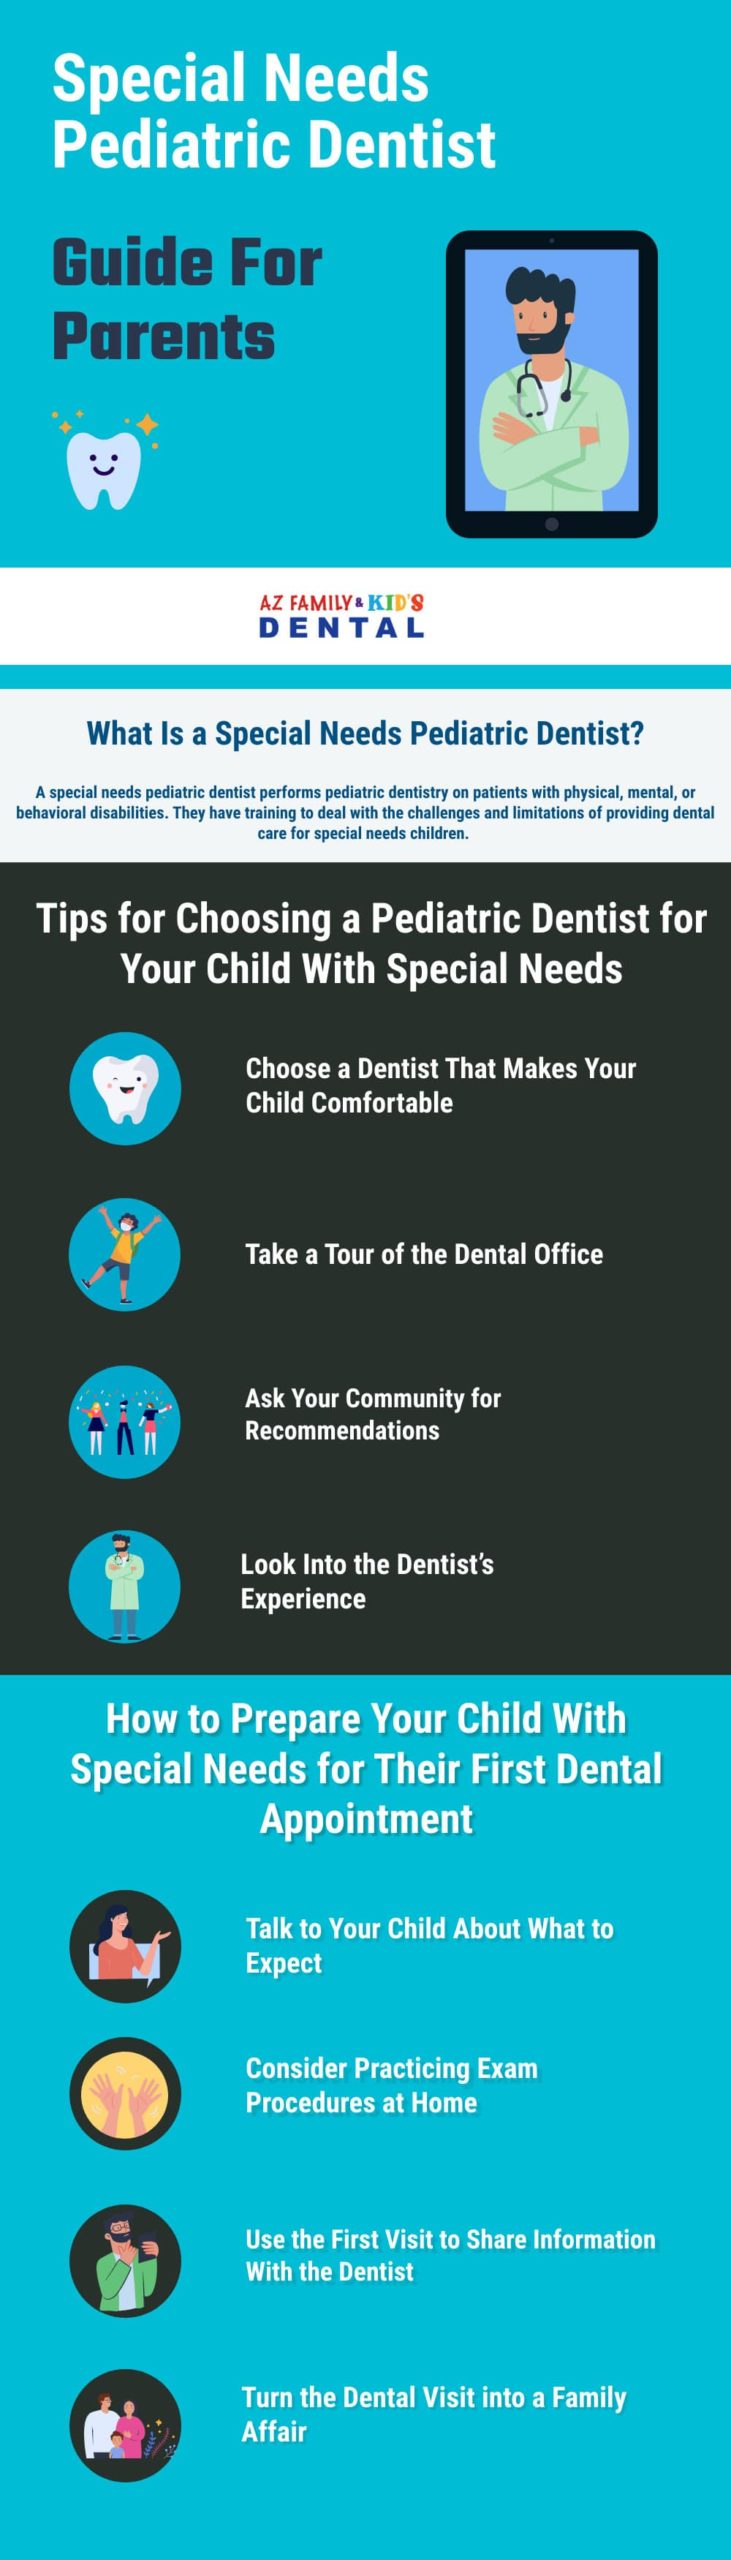 Special Needs Pediatric Dental Guide For Parents Infographic